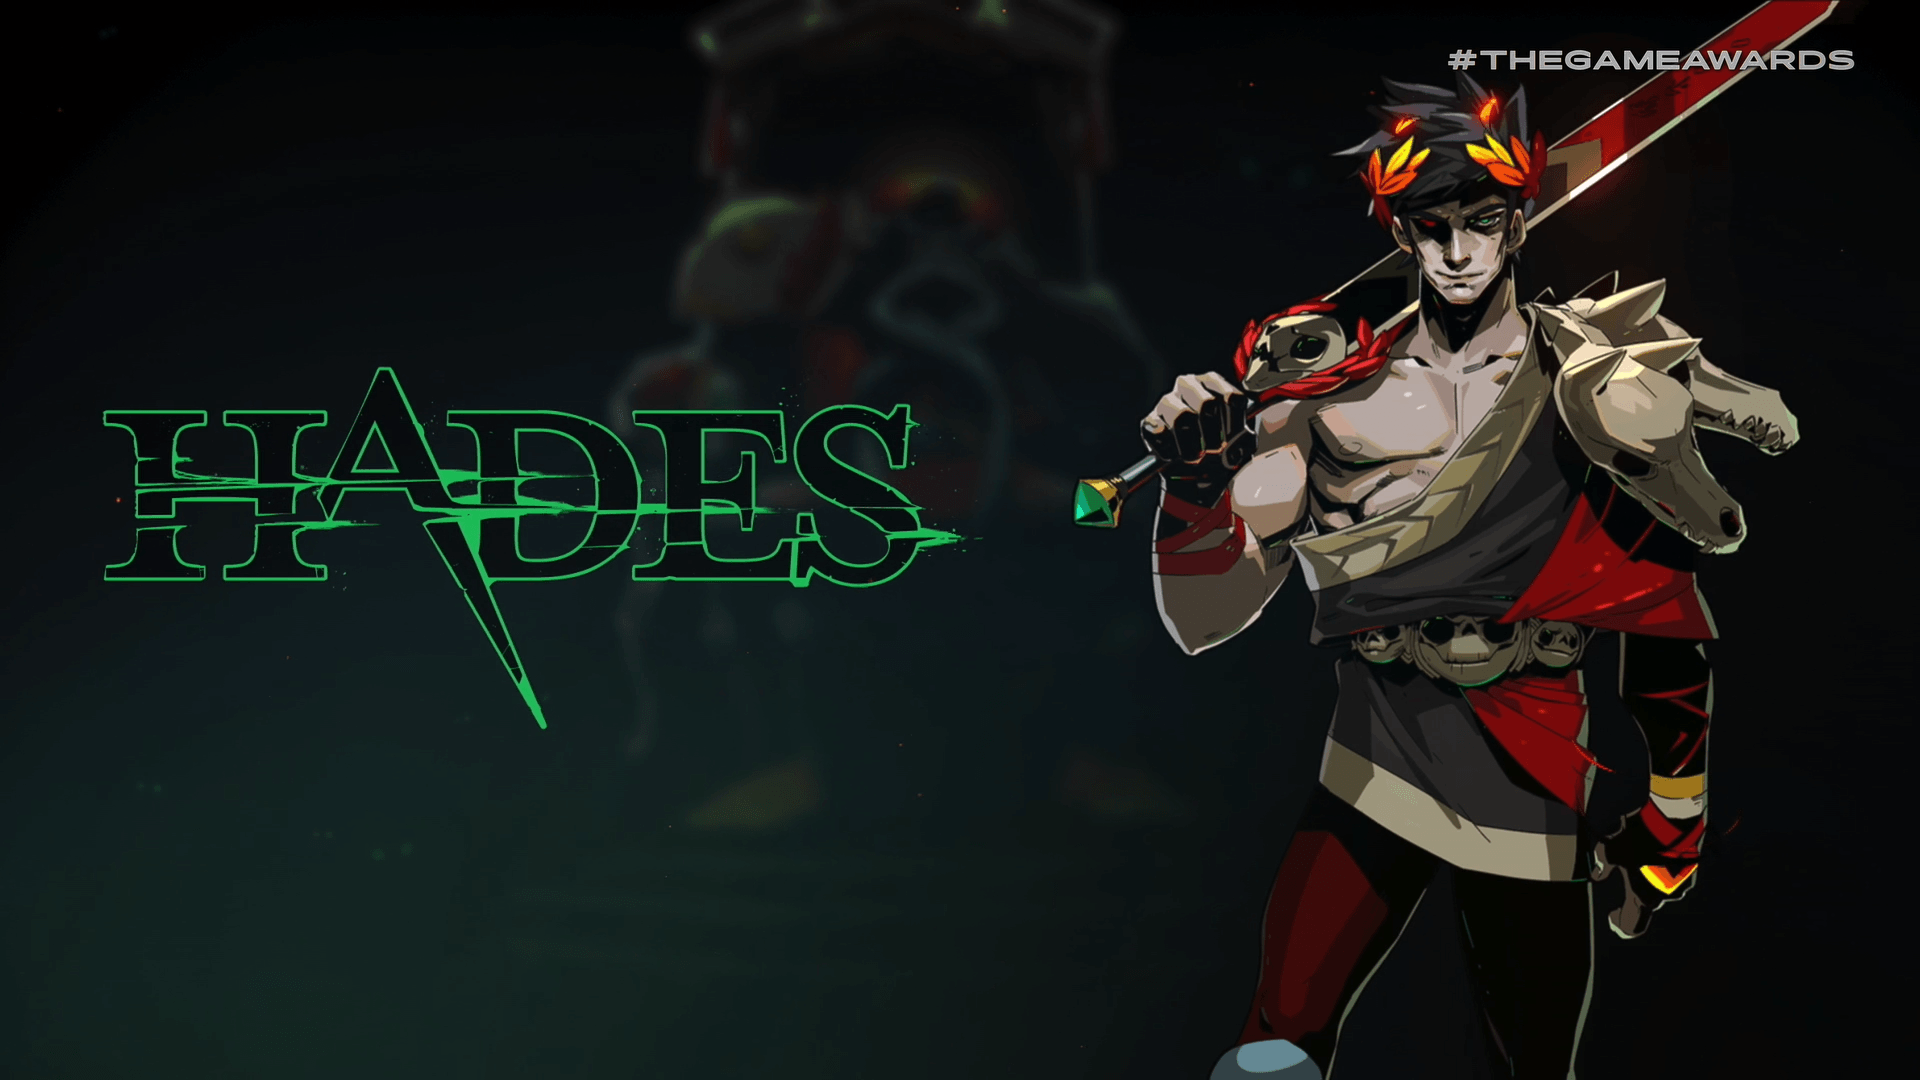 Supergiant Games' New Title, Hades, Available Now on Epic Games